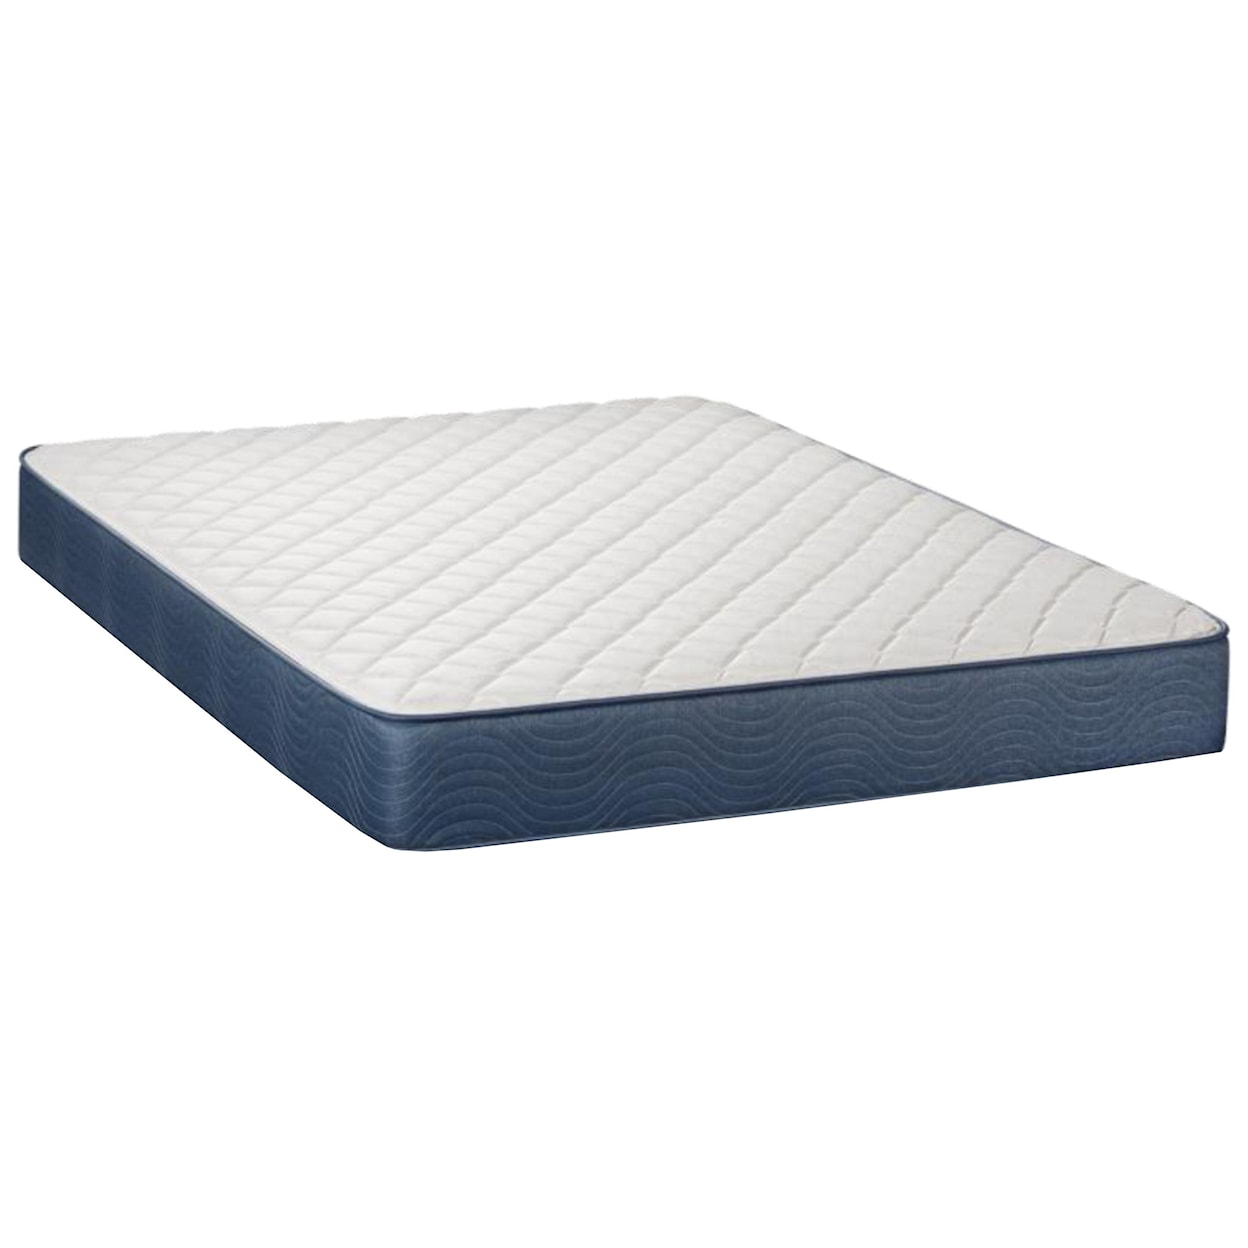 Restonic Sumner Firm Twin 9" Firm Two Sided Mattress